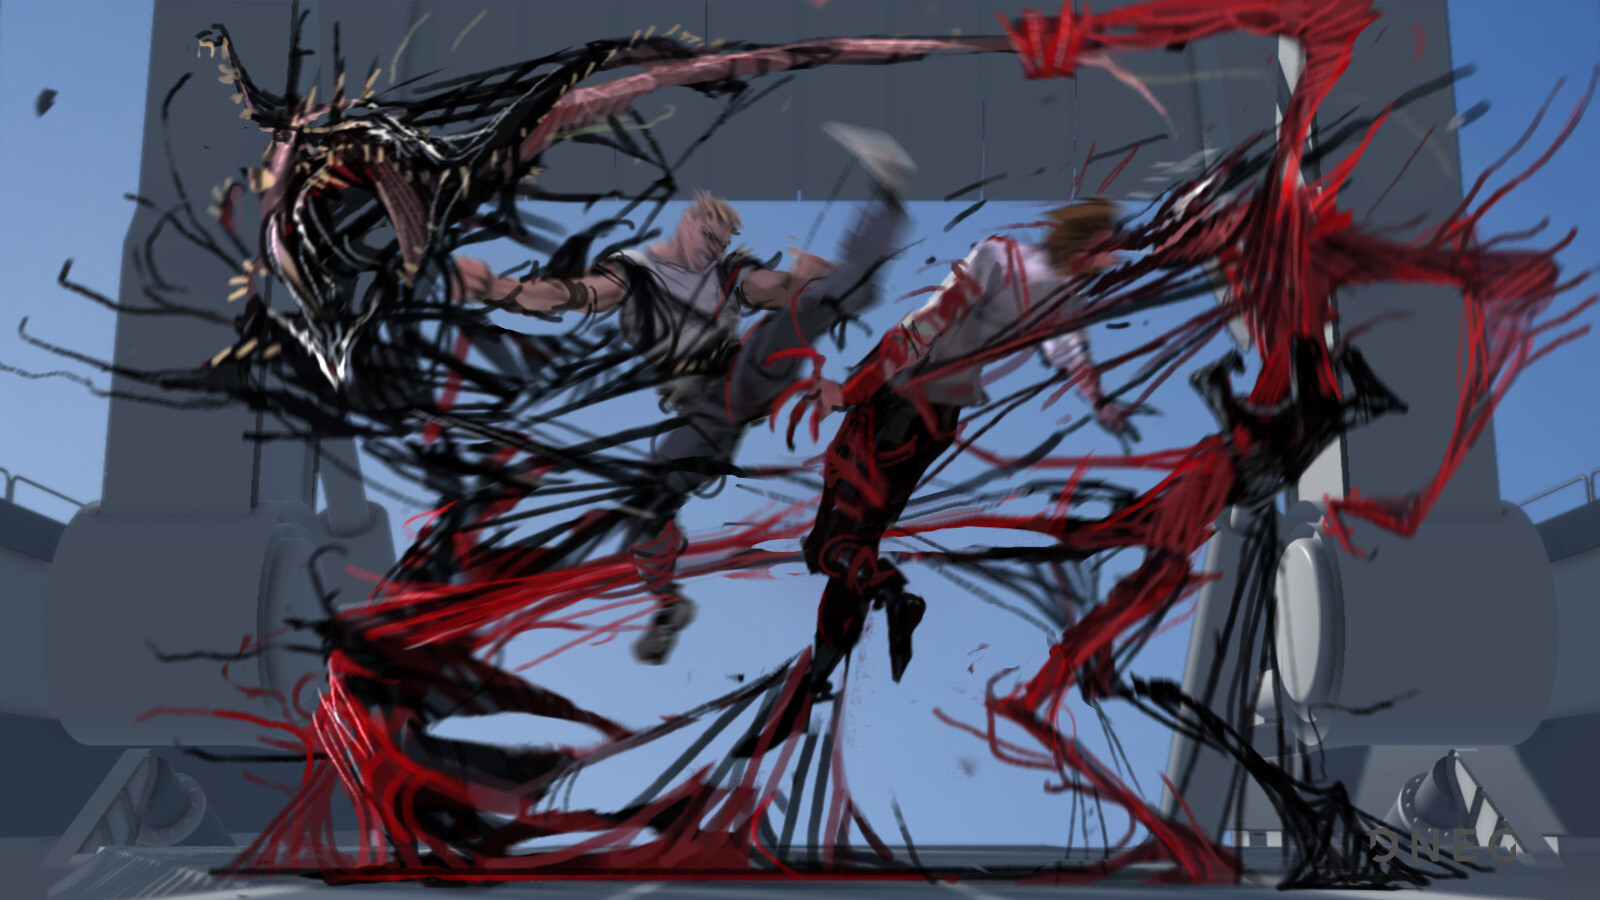 Cool Concept Art From VENOM Shows an Unused Scene and a Fight Sequence.